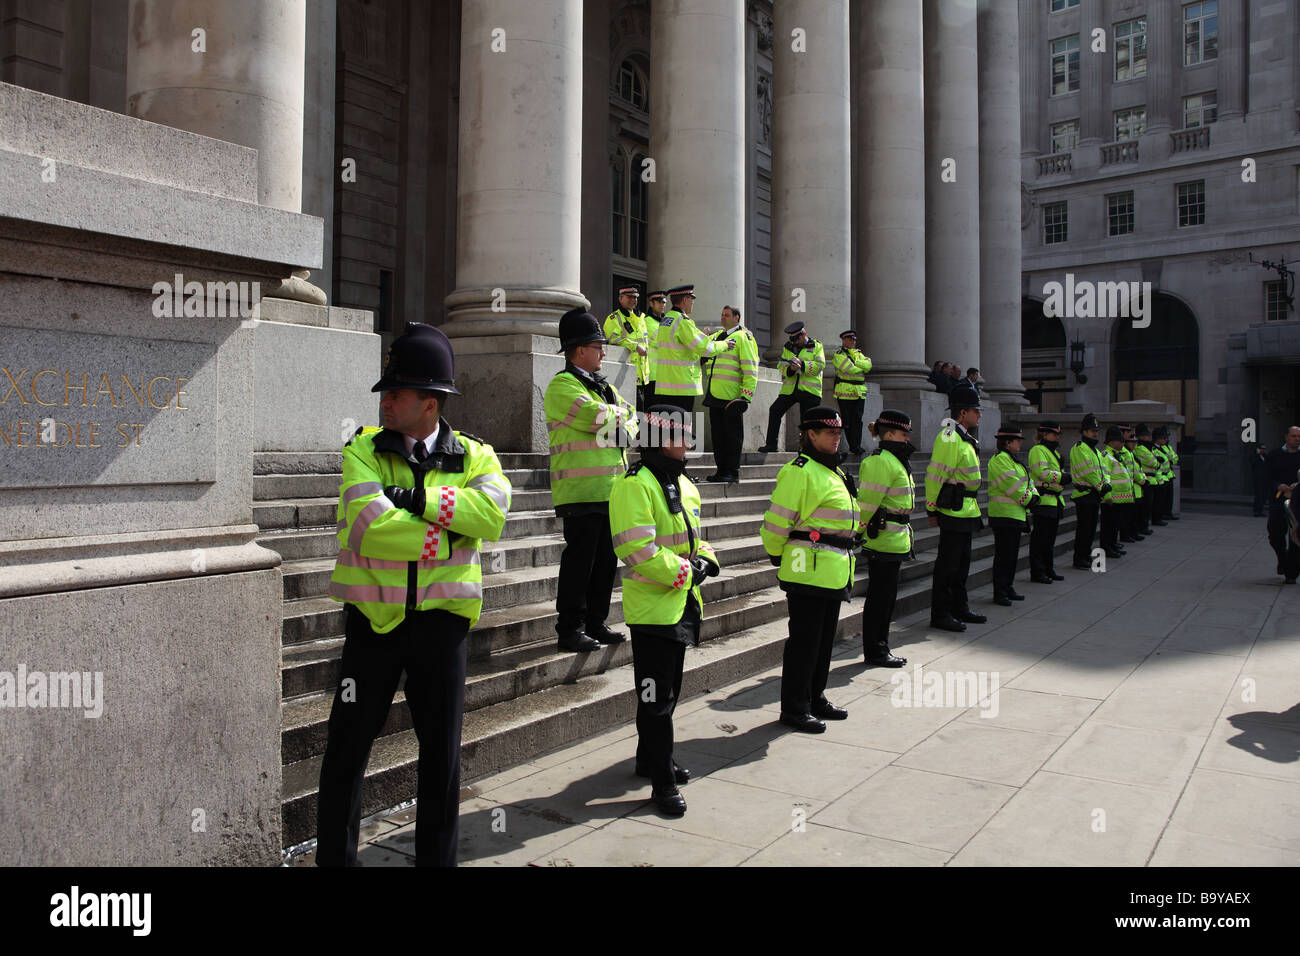 Police cordon outside the Bank of England during the 2009 G20 summit, London, UK. Stock Photo